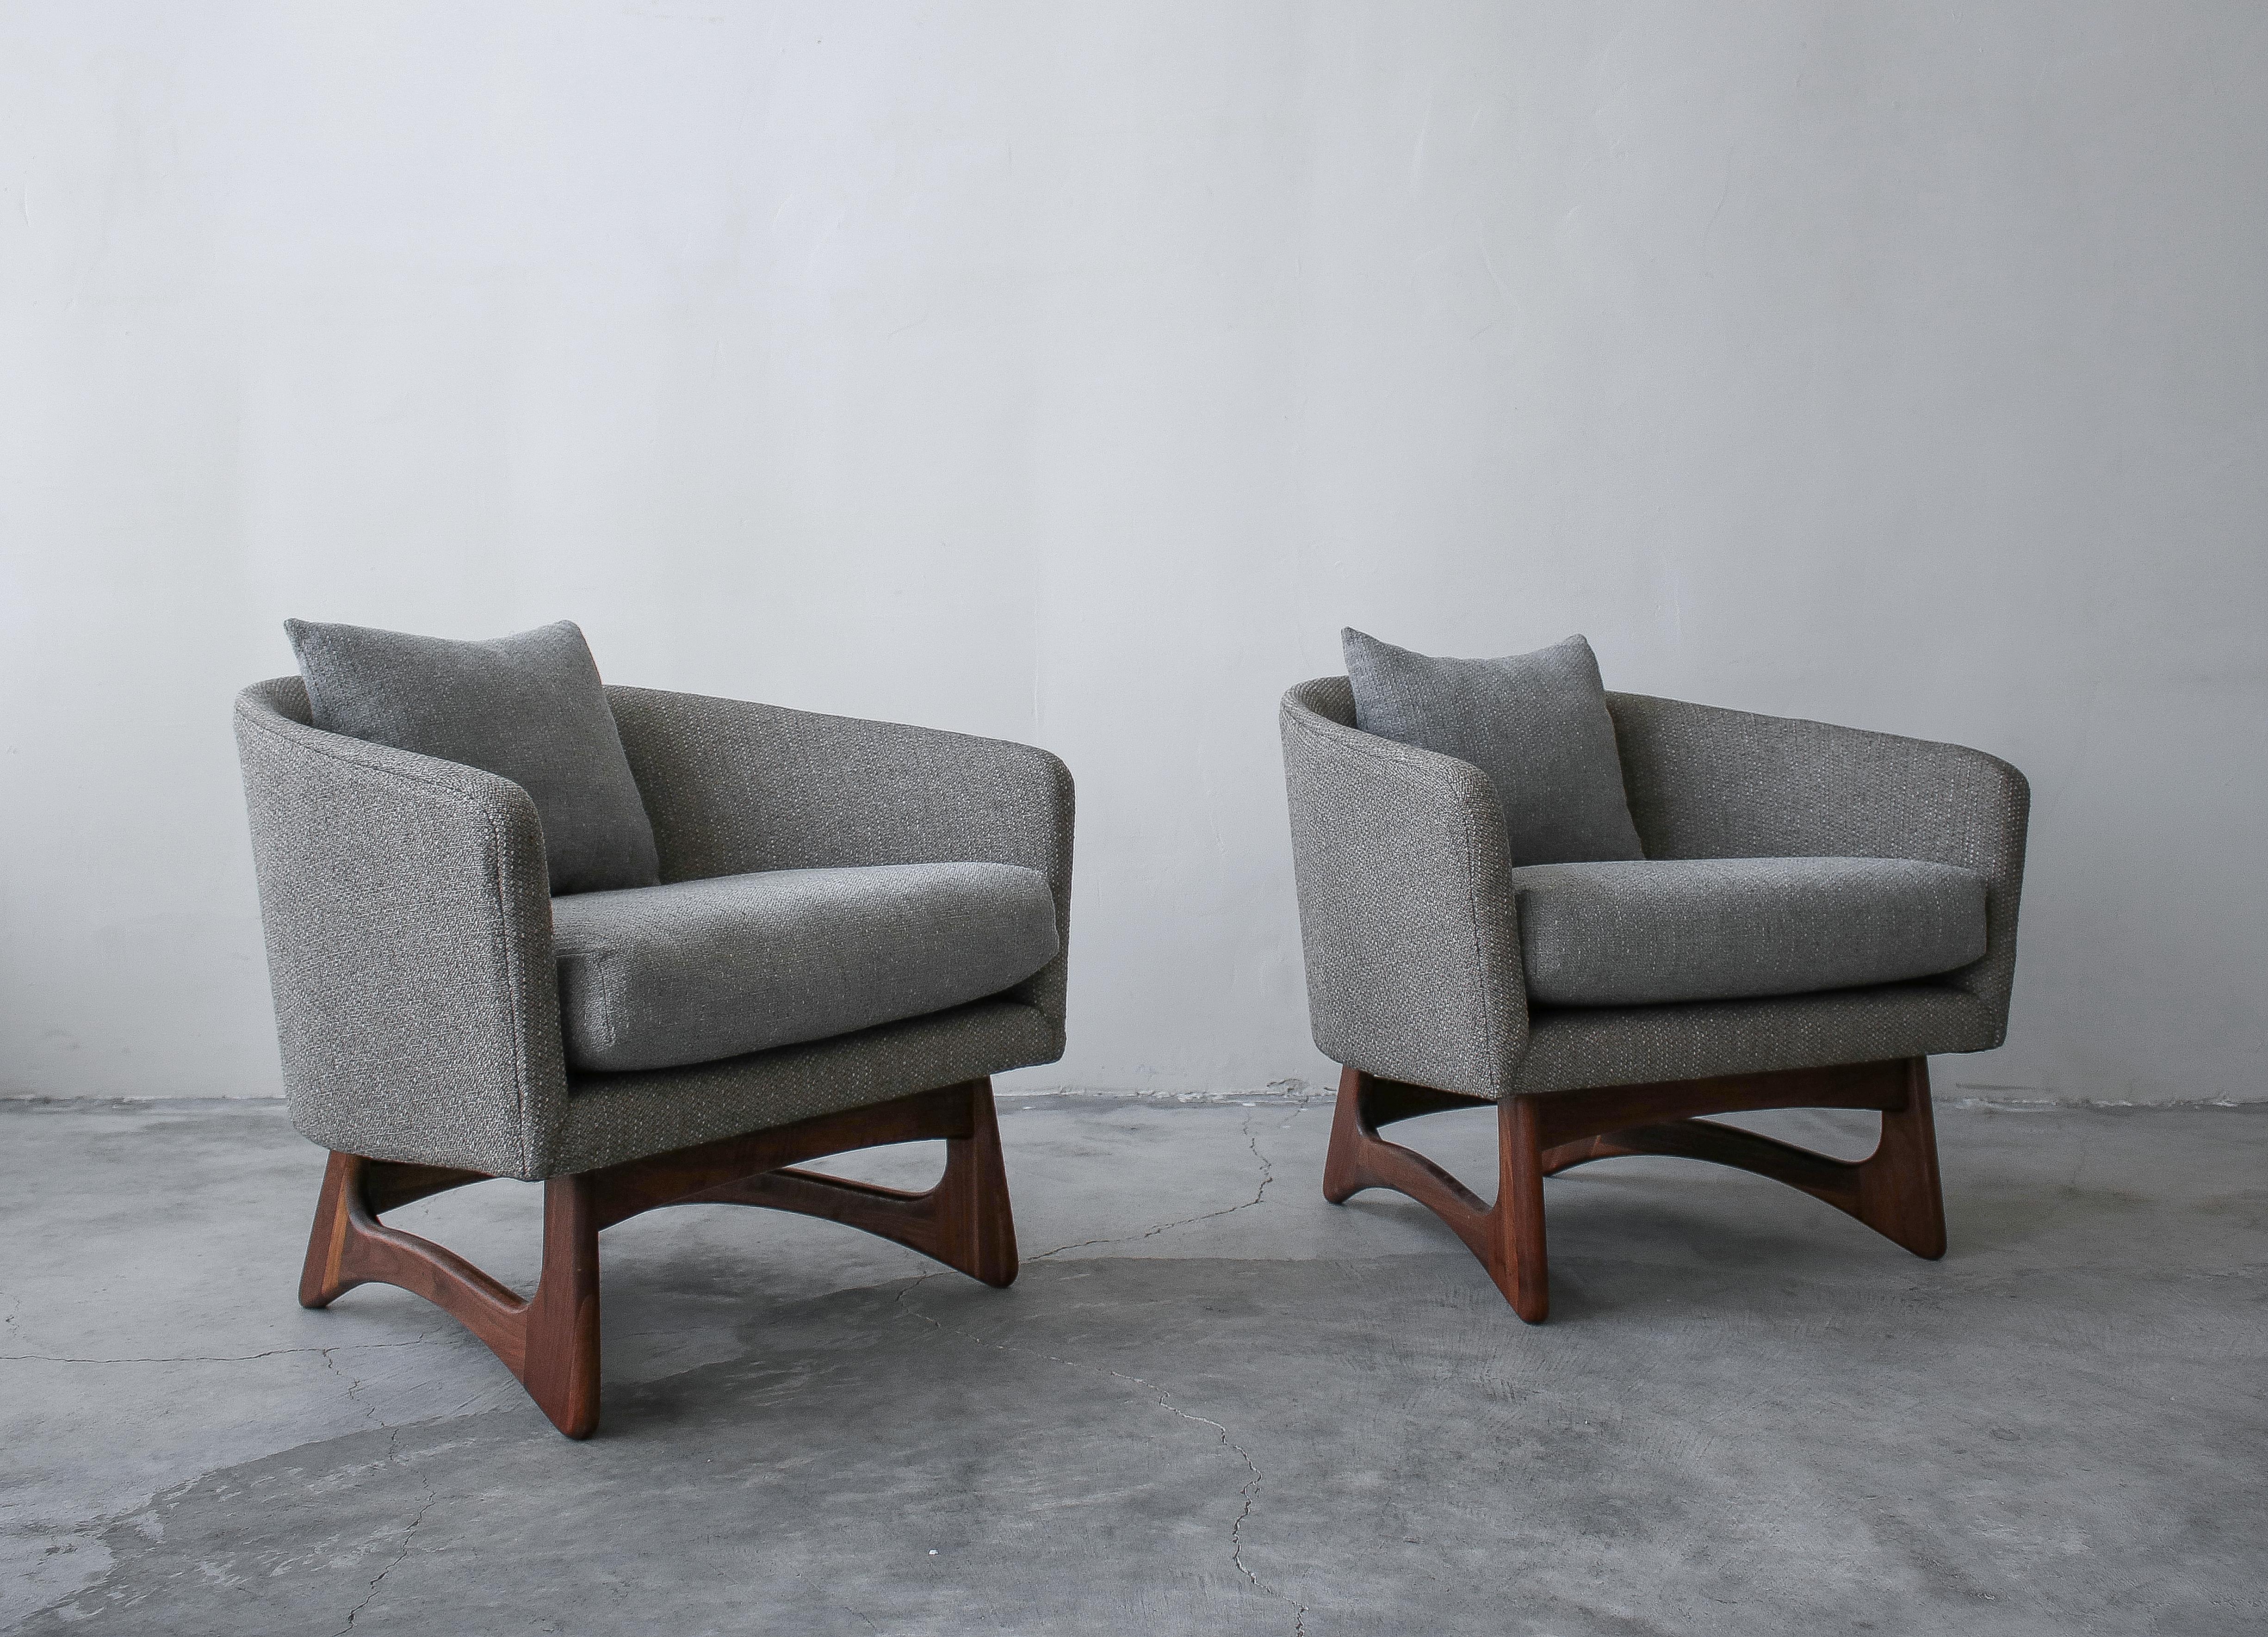 Rare pair of midcentury lounge chairs by Adrian Pearsall. These chairs have beautiful barrel shape and sculpted walnut bases. Chairs are substantial in size, pictures do not do them justice.

Chairs have been professionally reupholstered with all